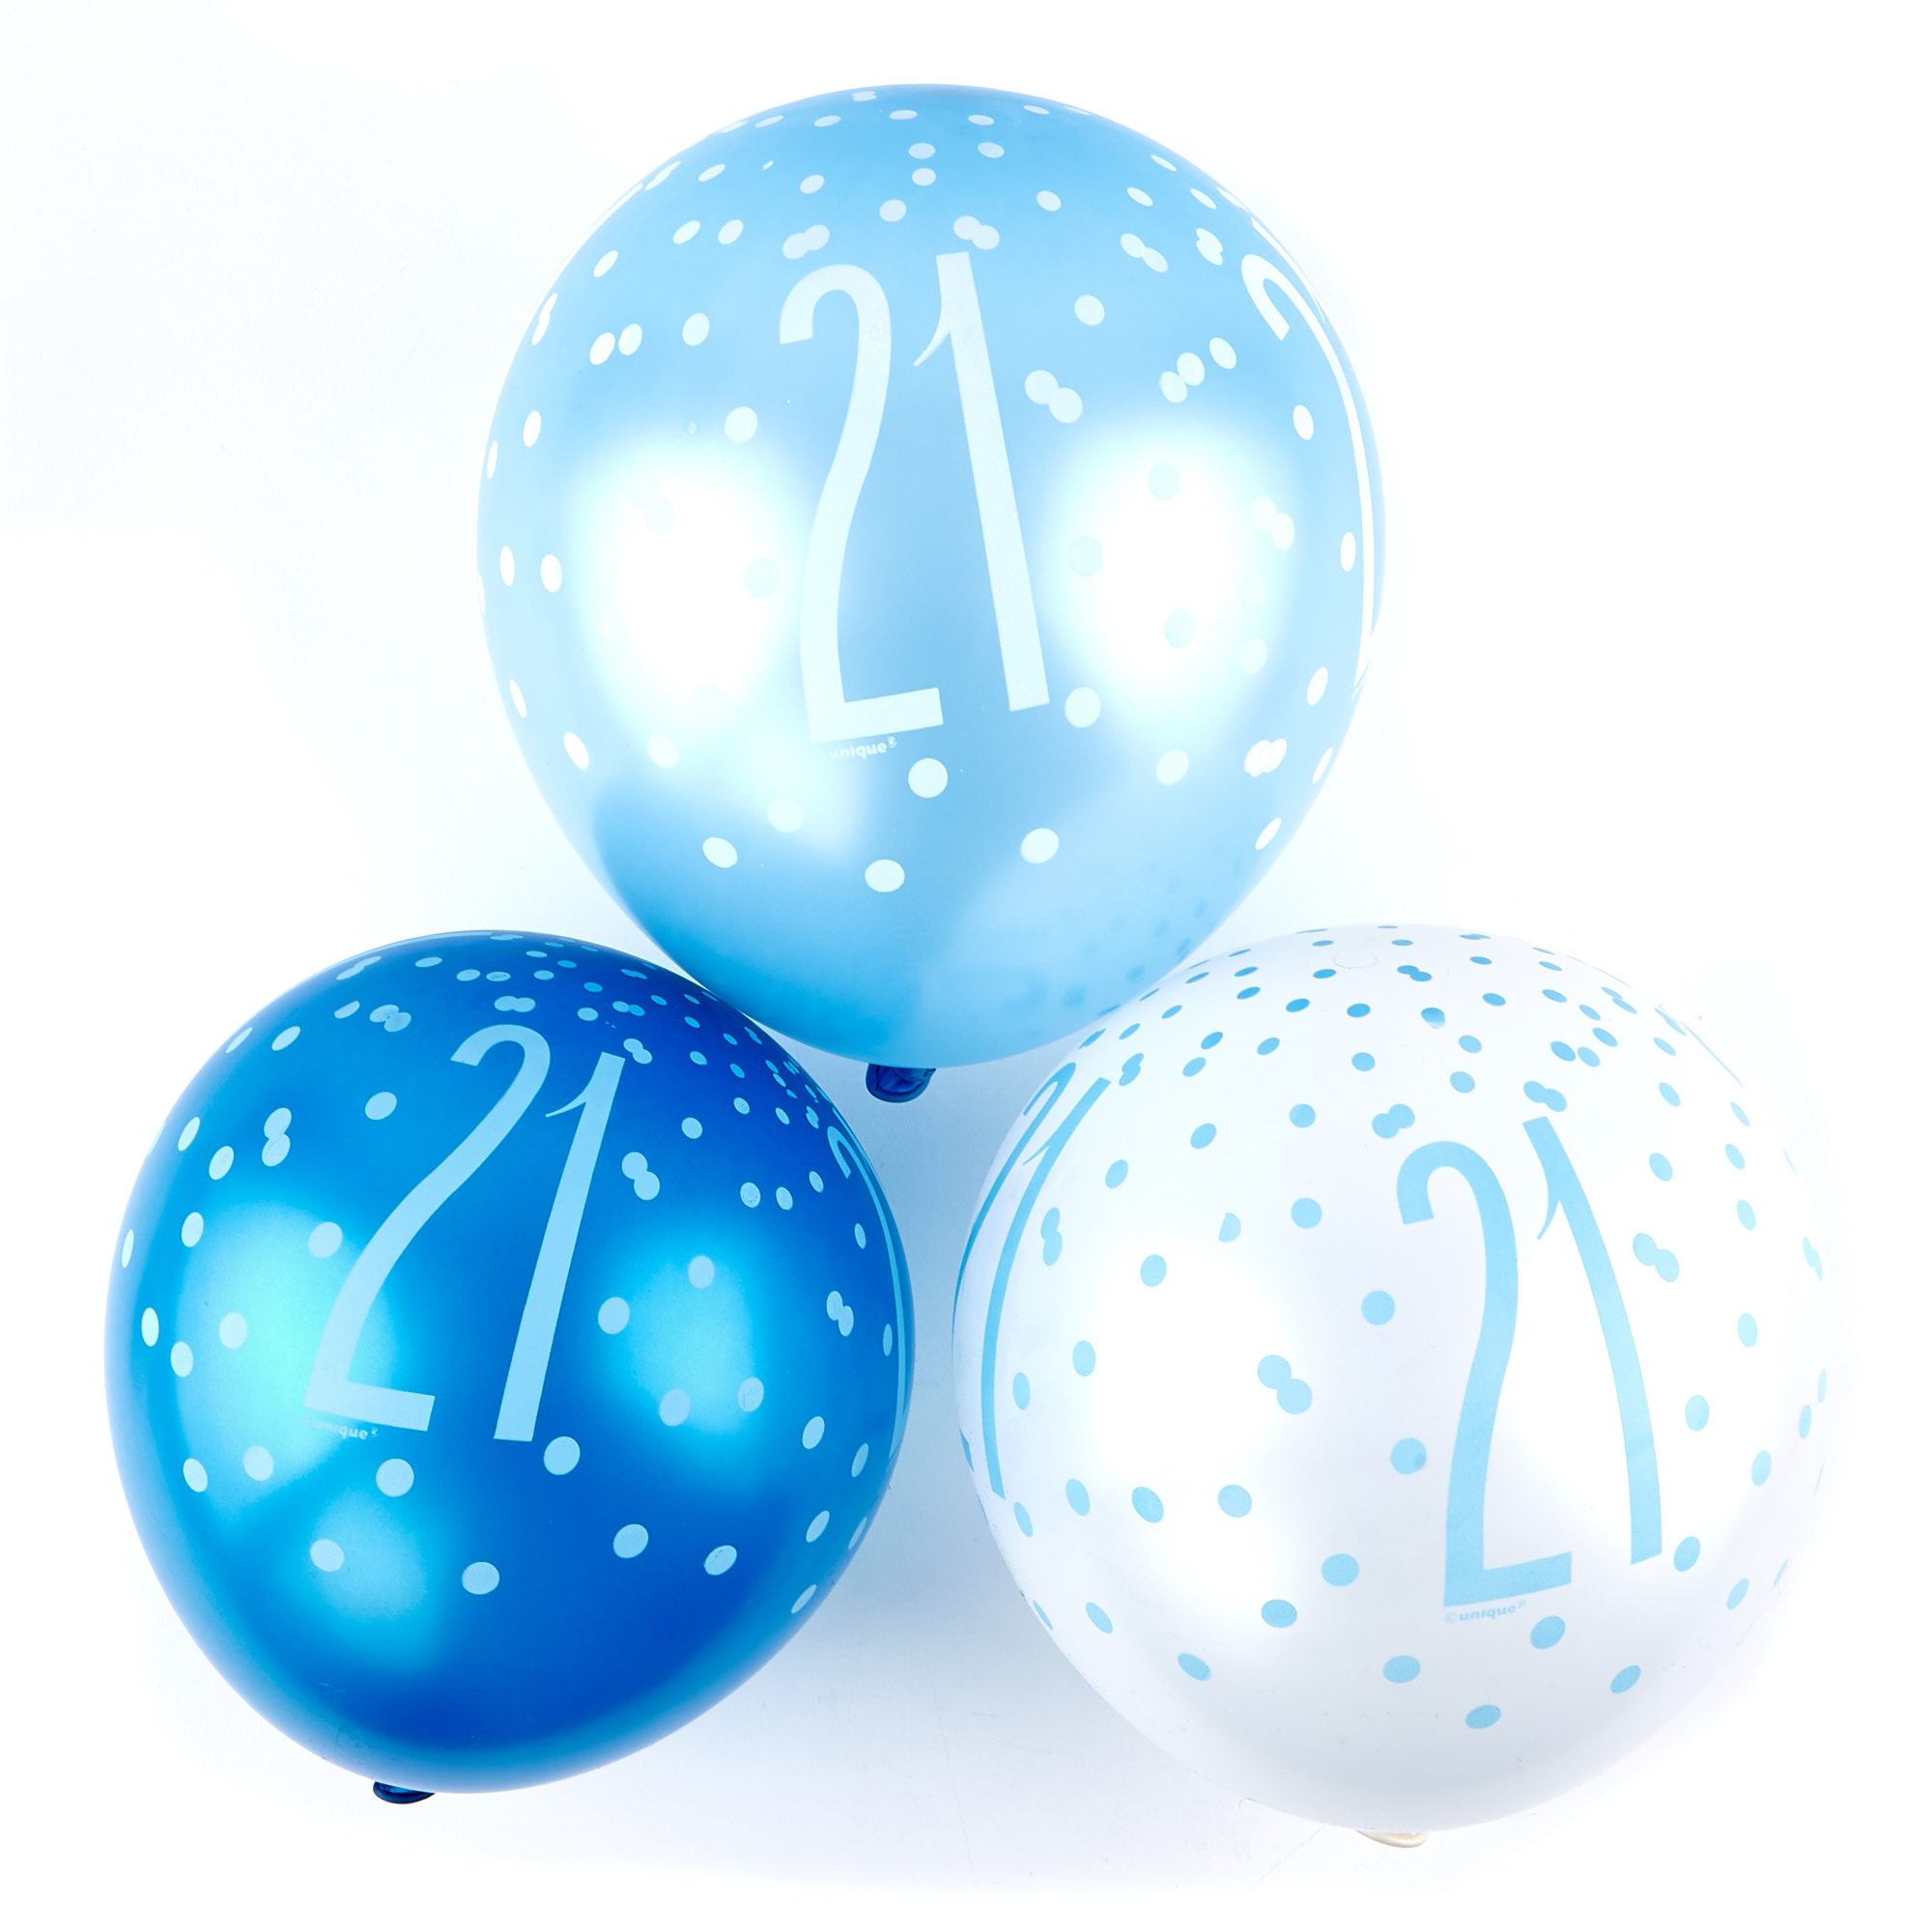 Blue 21st Birthday Party Tableware & Decorations Bundle - 16 Guests